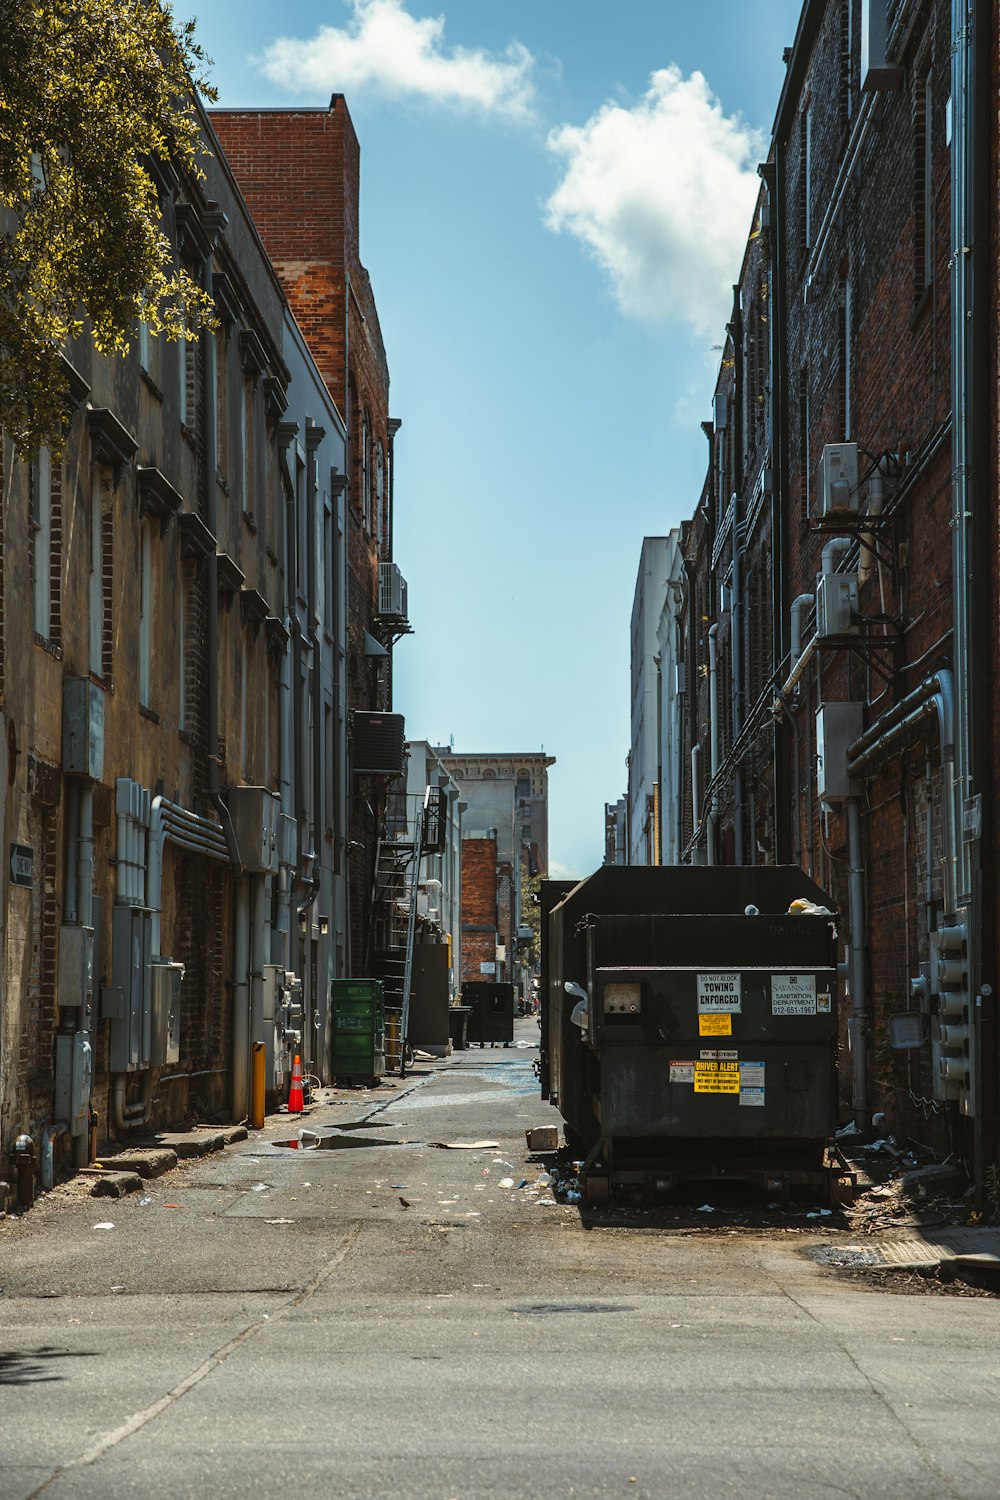 a truck parked in a street between buildings